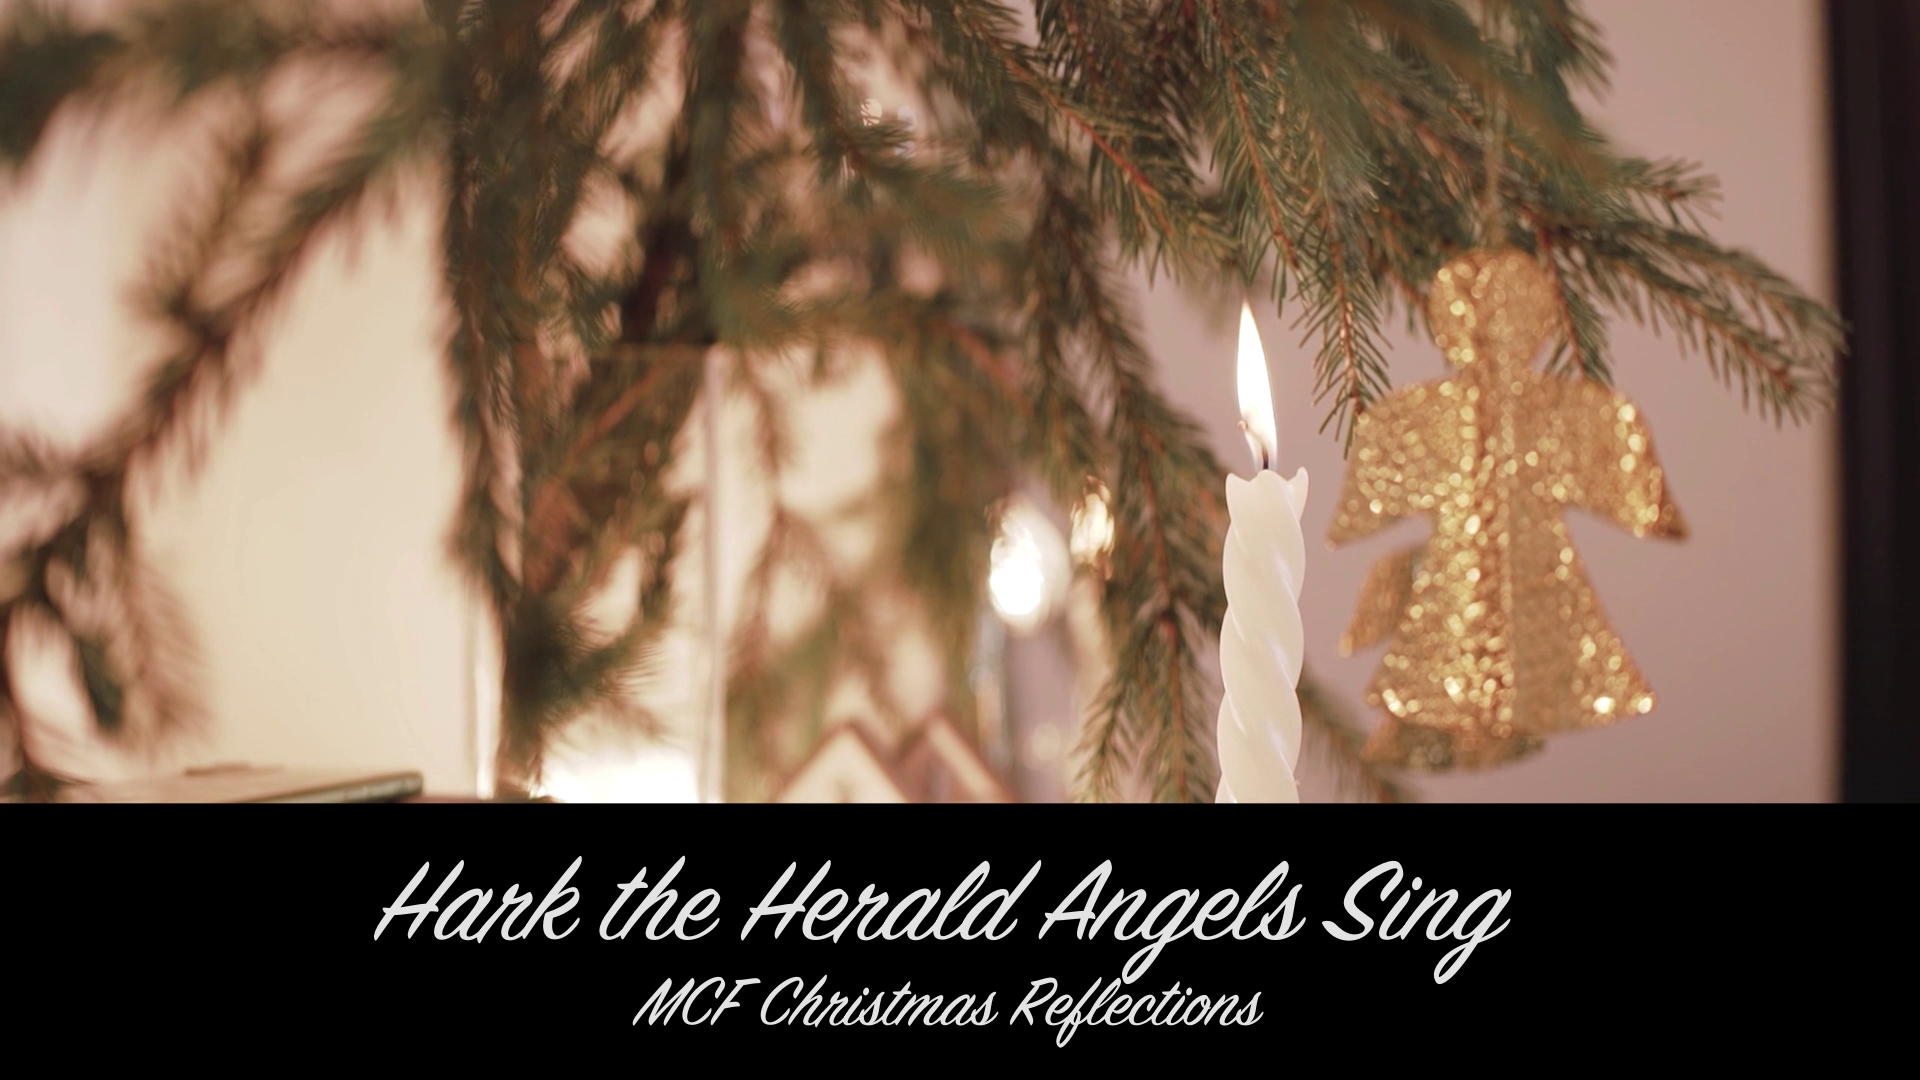 Erica Lugg – Hark, The Herald Angels Sing